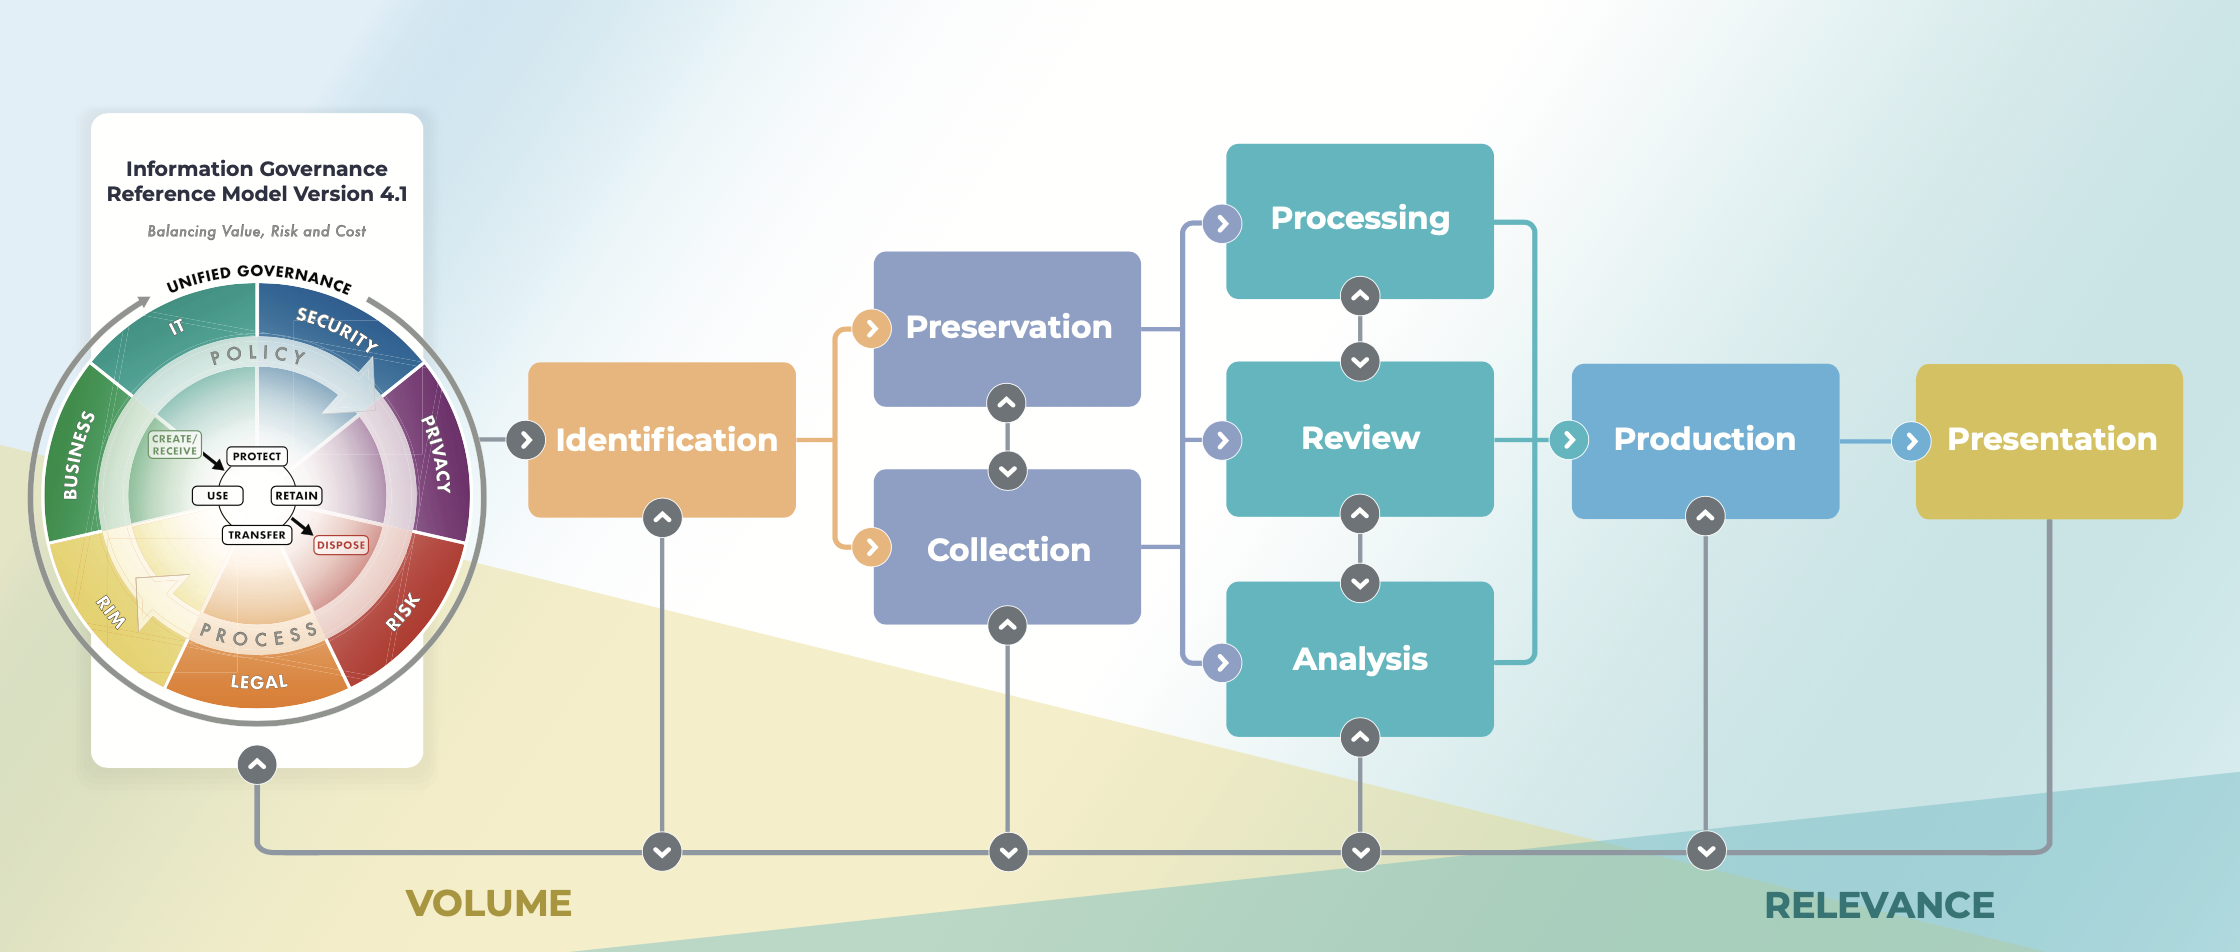 A process flow chart representing the 9 stages of the EDRM